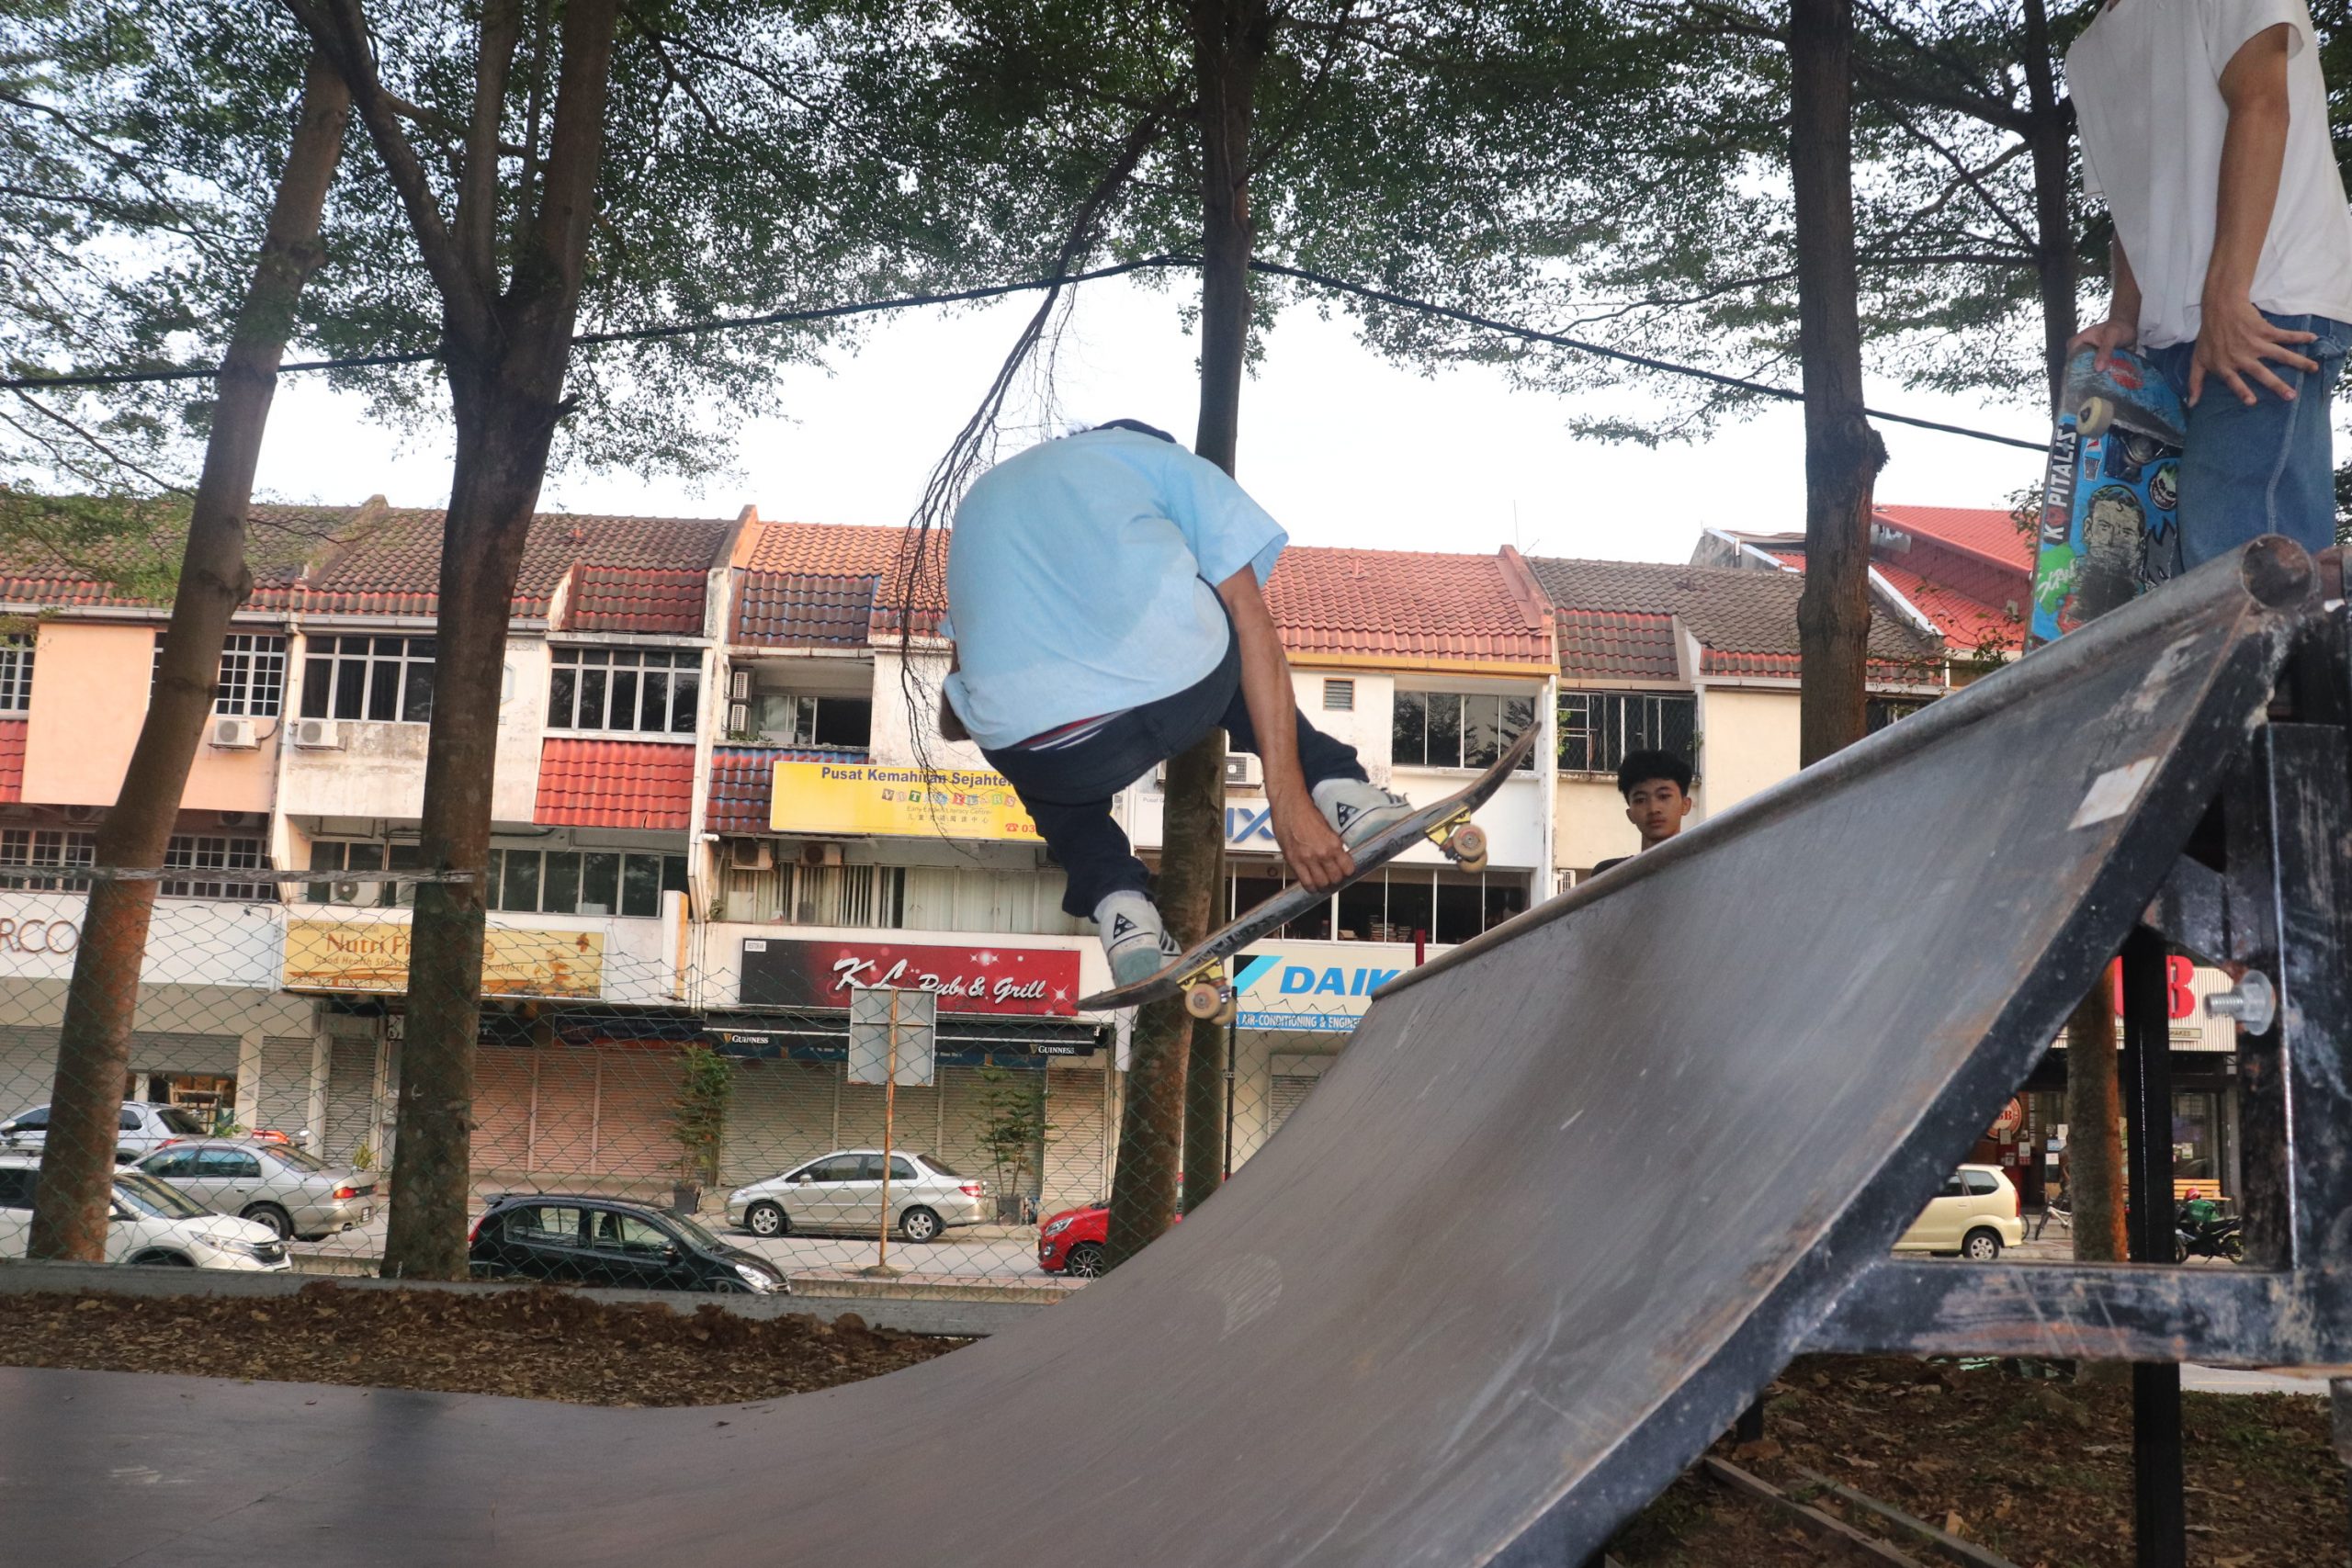 This Is The Story Of A Ramp: How A Group Of TTDI Skateboarders Are Holding It Down For The Community